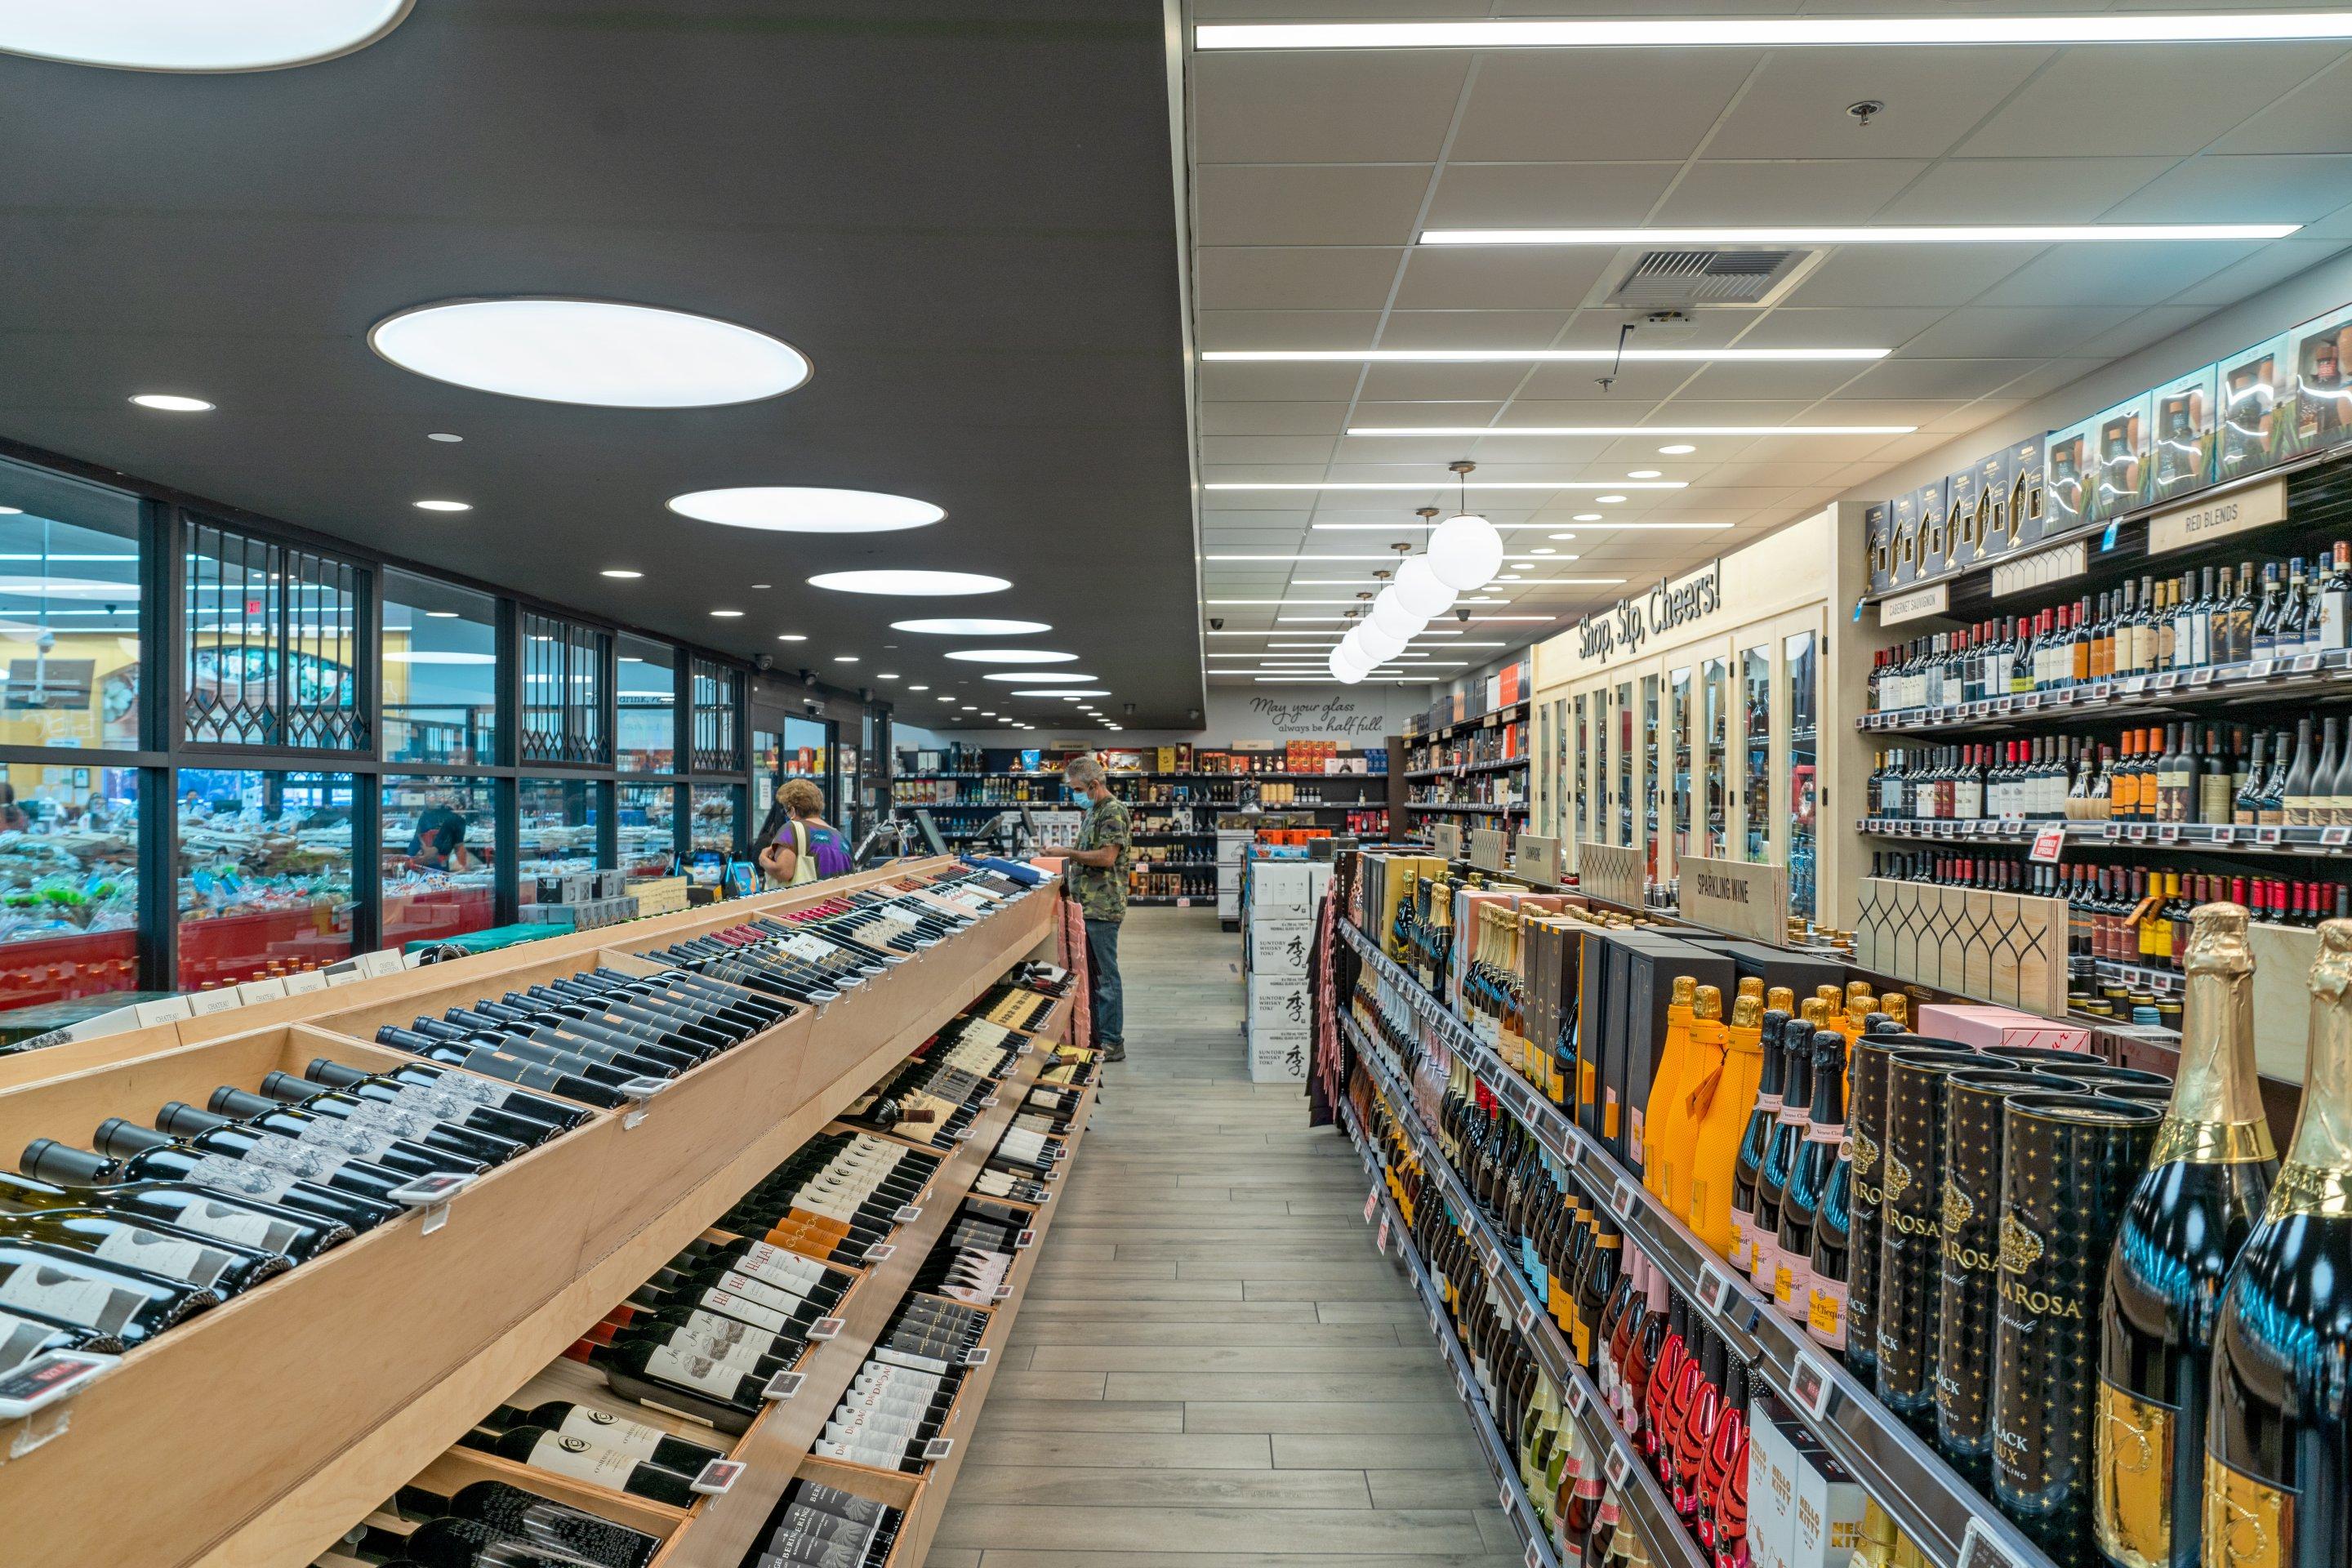 Same day alcohol delivery or free in-store pickup